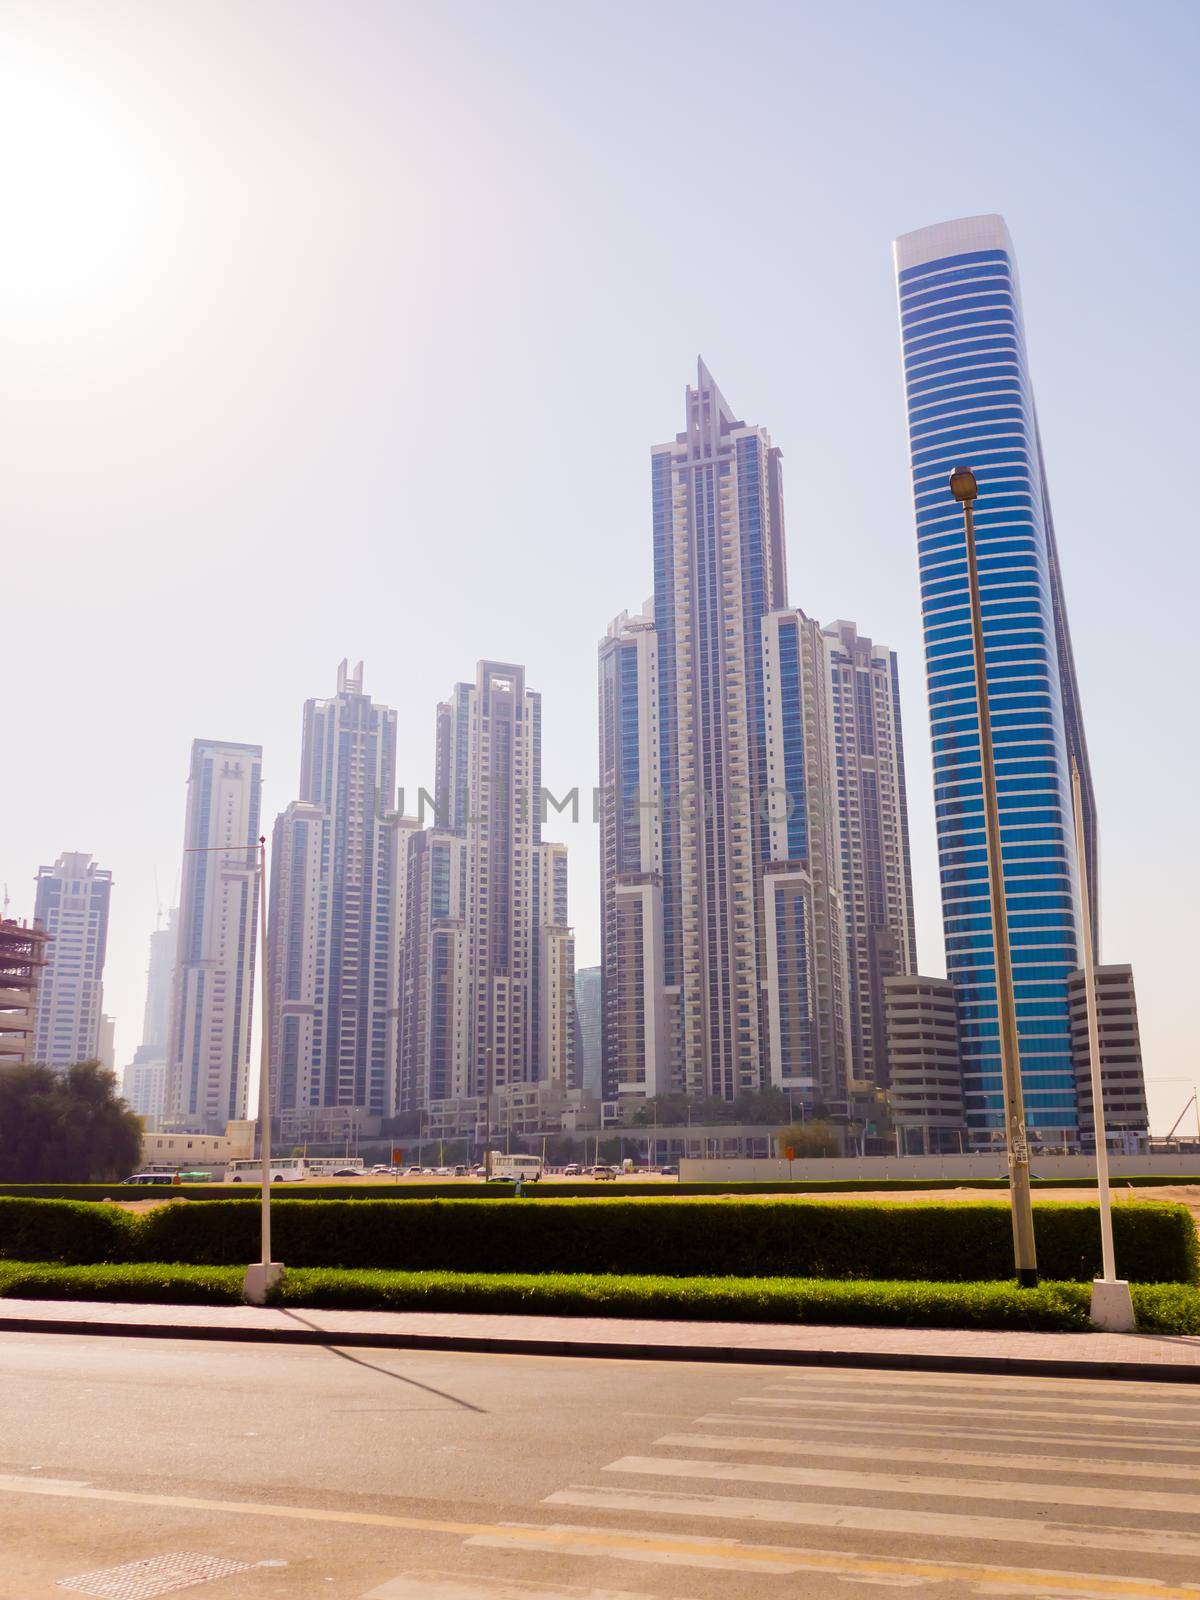 Streets with modern skyscrapers of the city of Dubai. by DovidPro